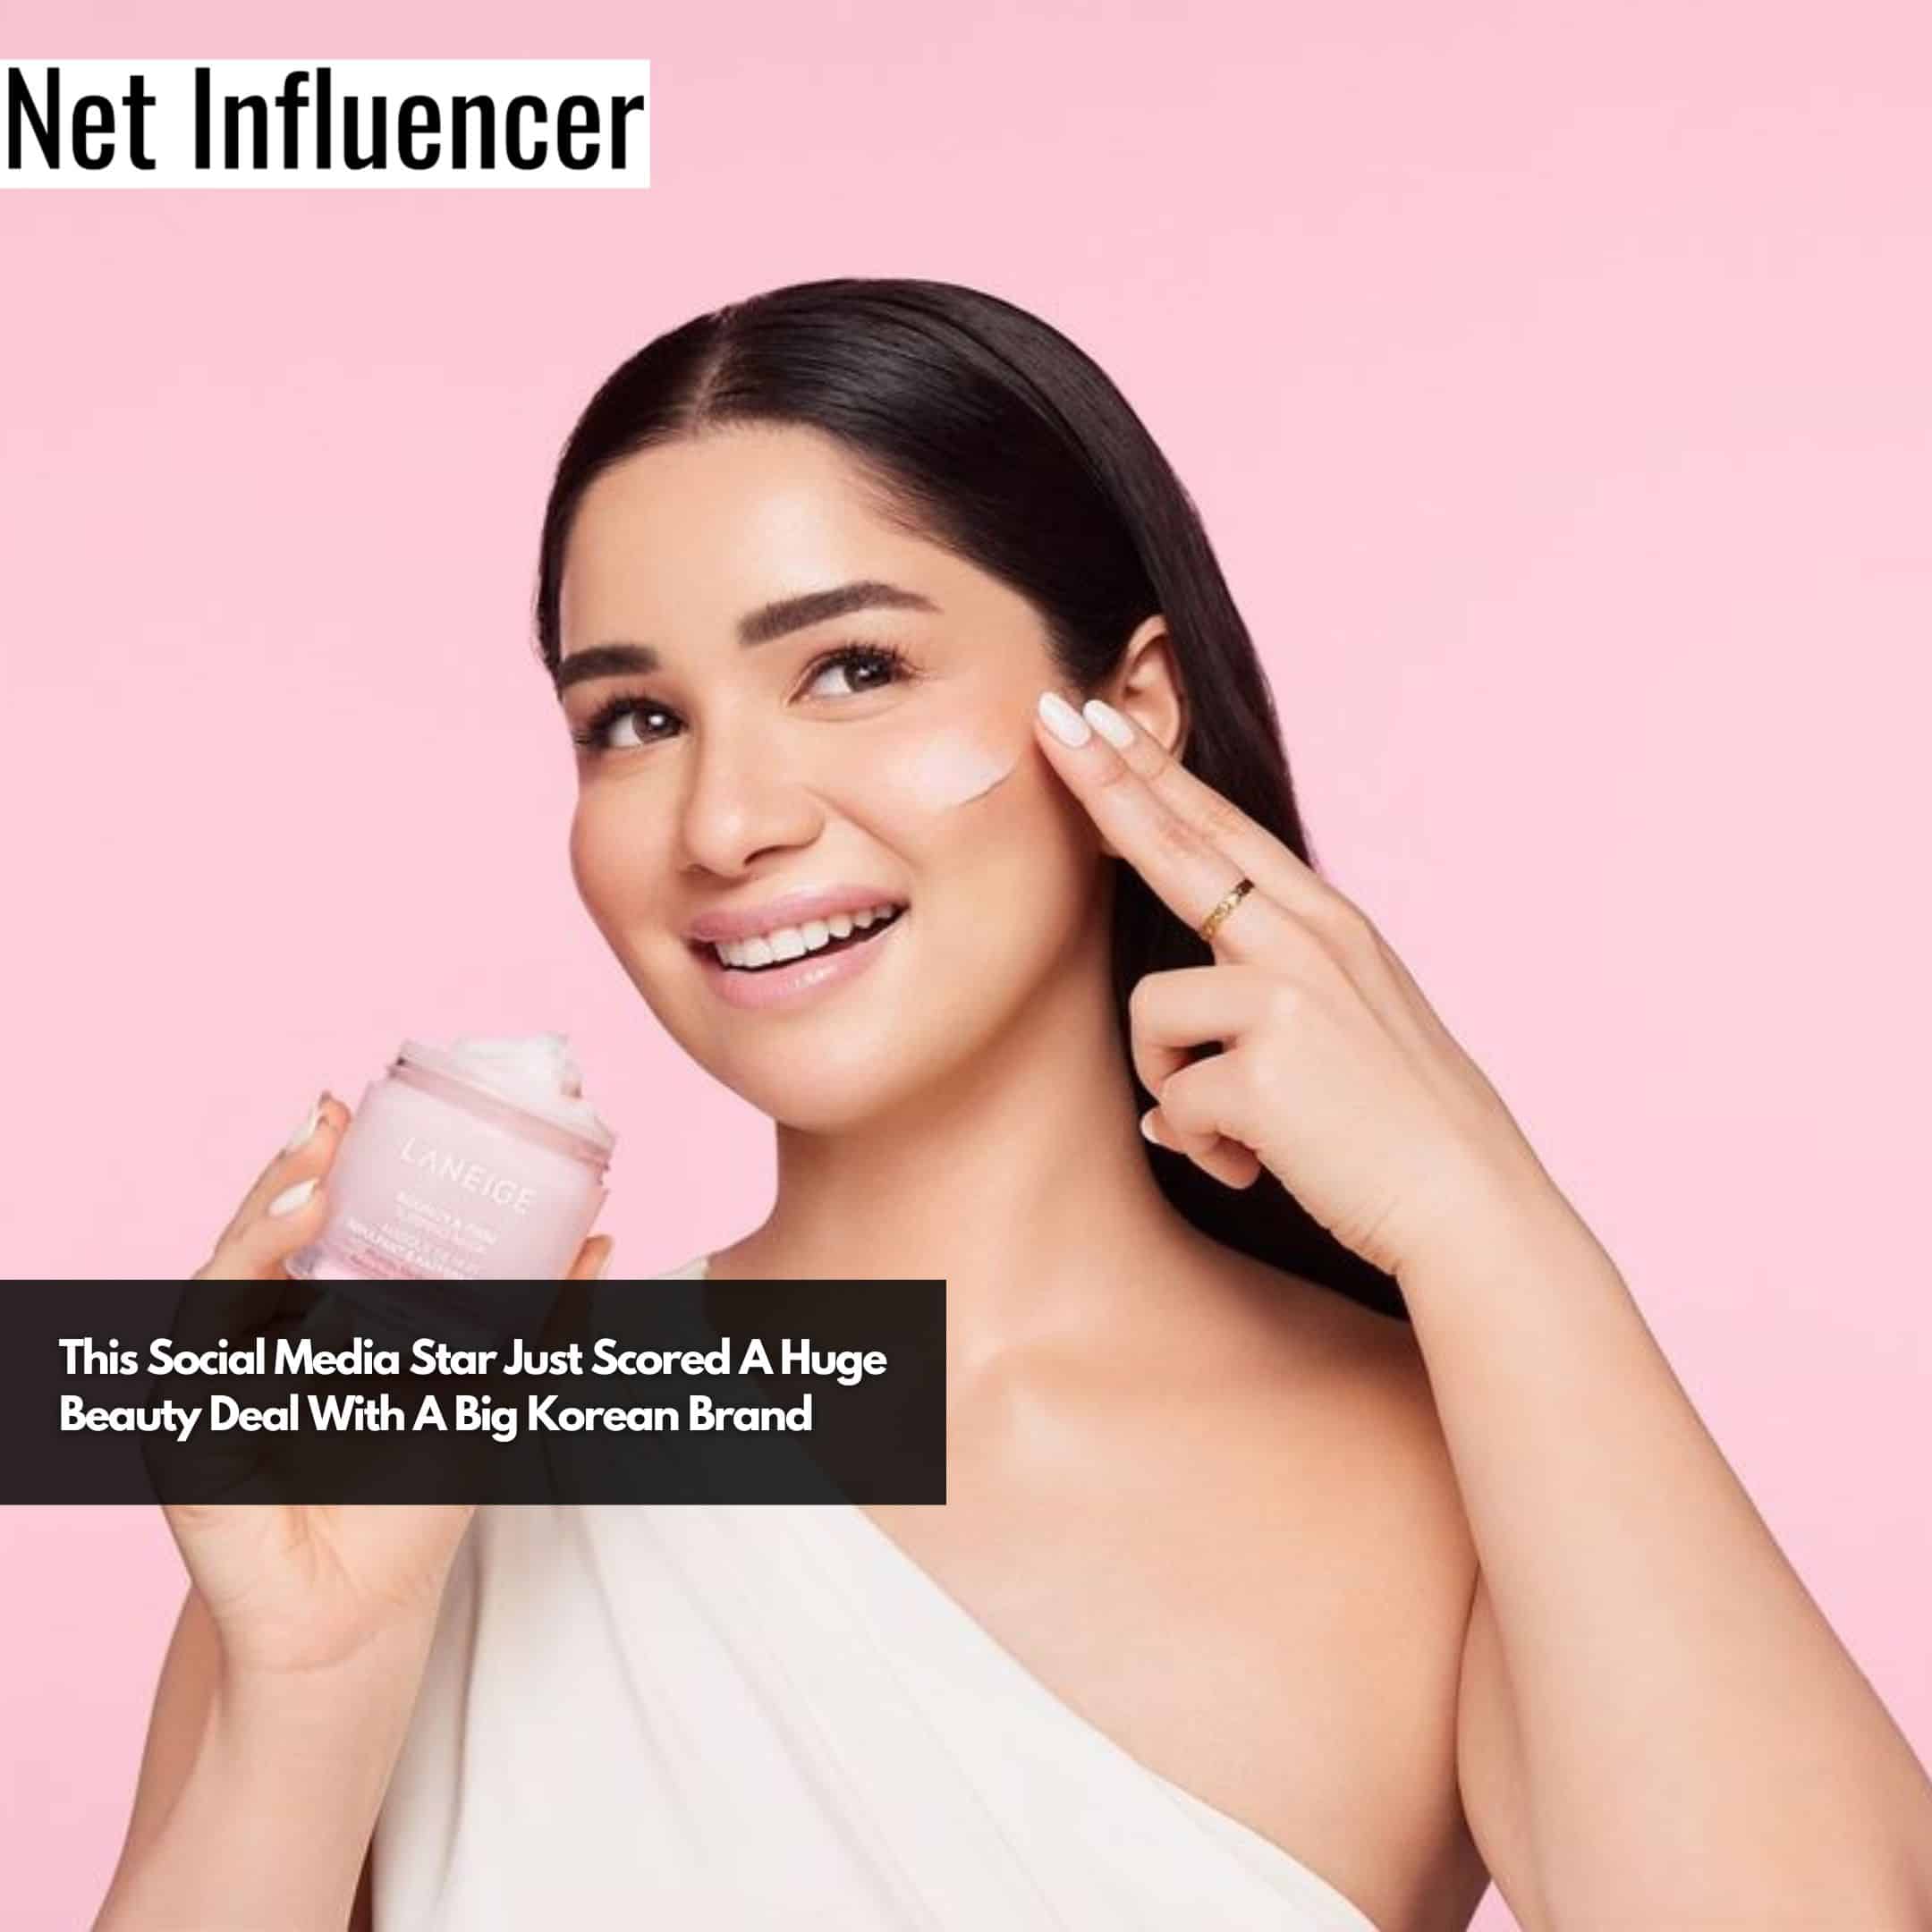 This Social Media Star Just Scored A Huge Beauty Deal With A Big Korean Brand (2)